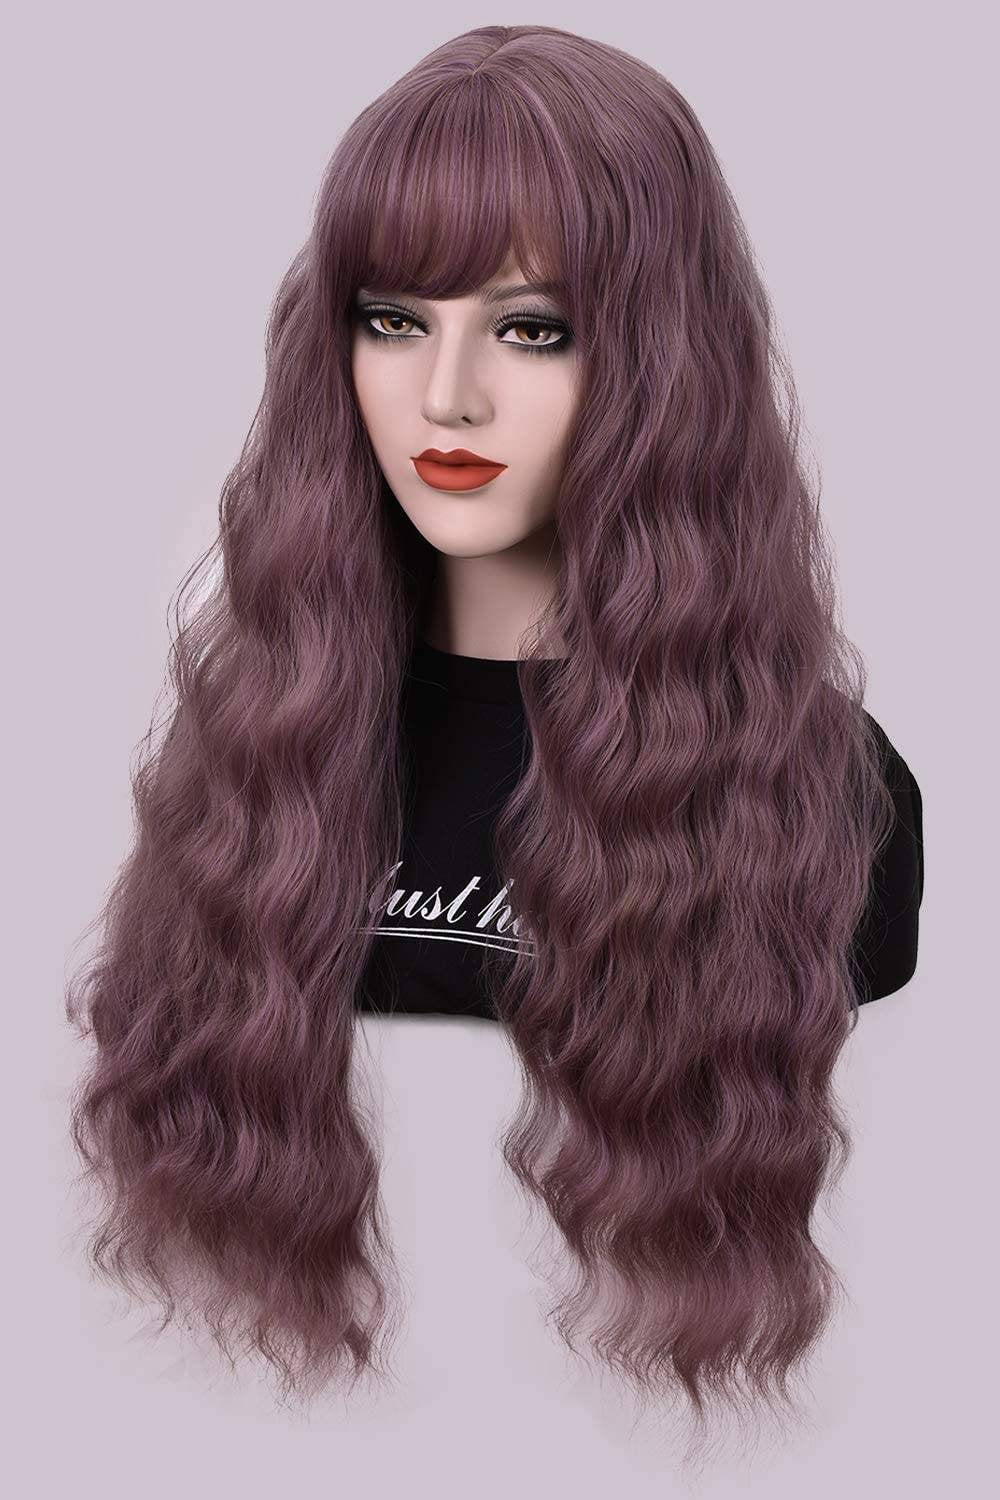 Purple Wavy Wig With Hair Bangs Silky Full Heat Resistant Synthetic Wig for Women - Natural Looking Machine Made 26 inch Hair Replacement - Goddess Beauty Royal Wigs